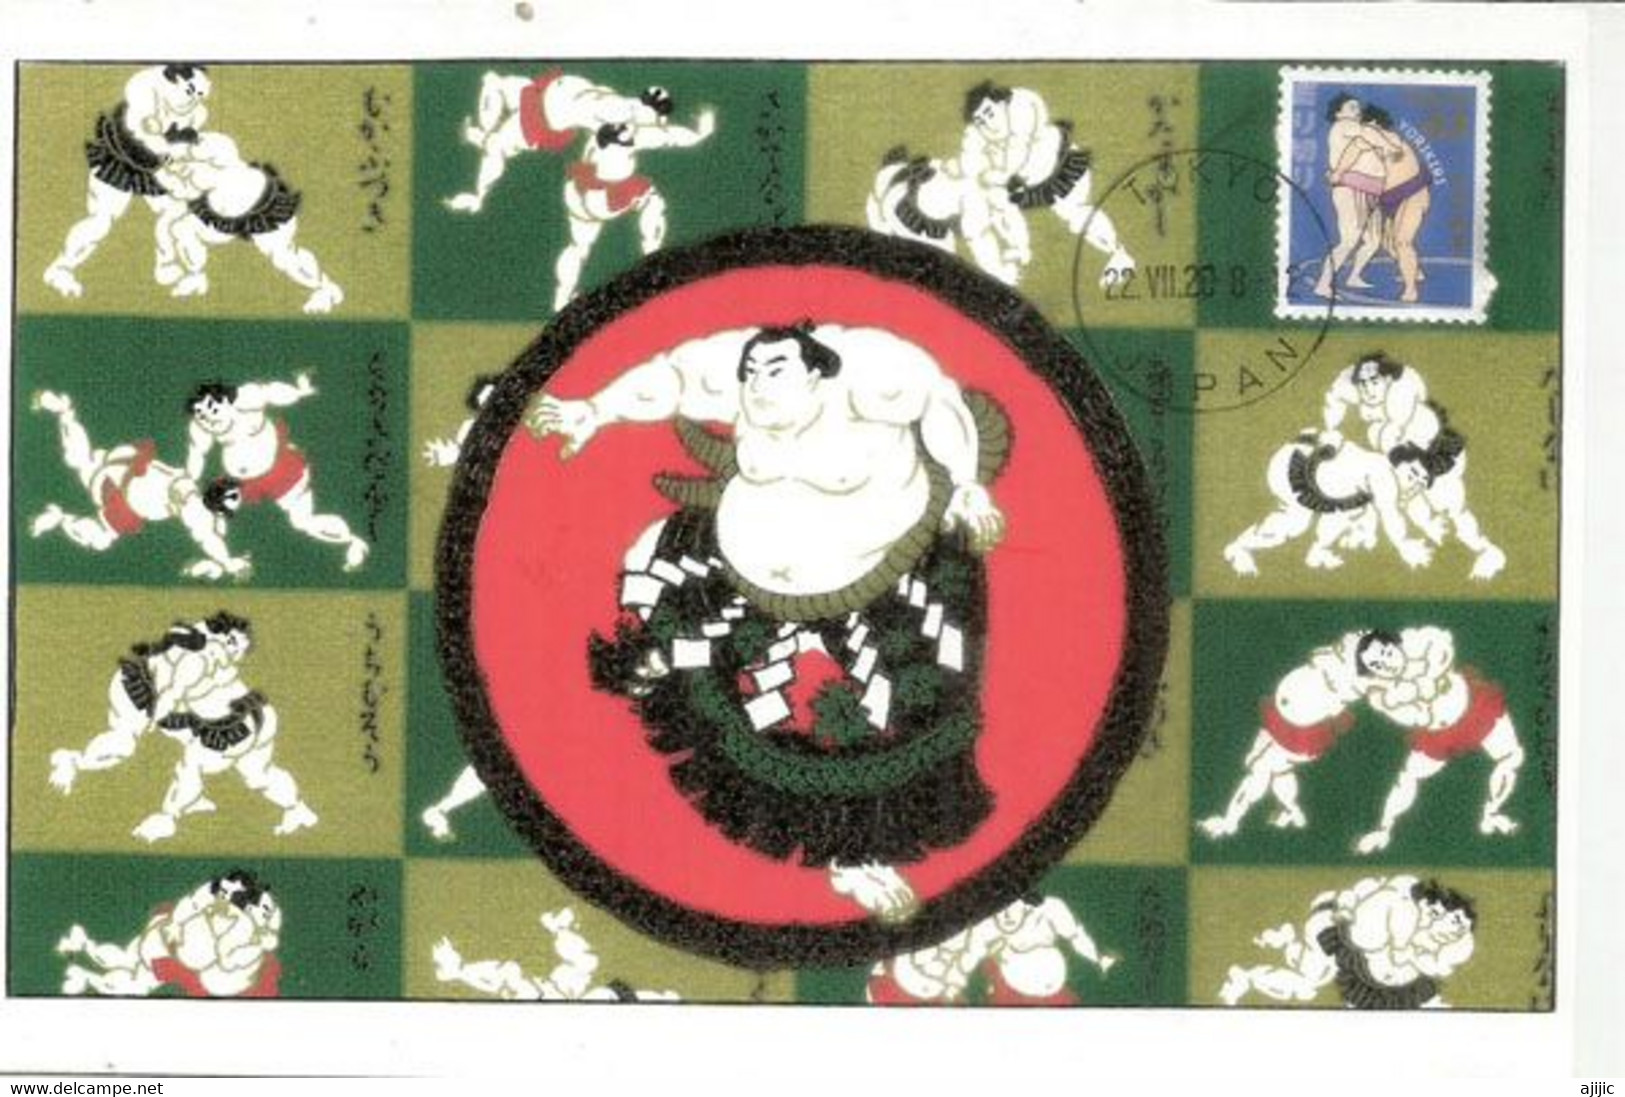 Sumo Granted Full Recognition As Olympic Sport By IOC.(RARE-SCARCE MAXIMUM-CARD FROM TOKYO) 2020 - Eté 2020 : Tokyo